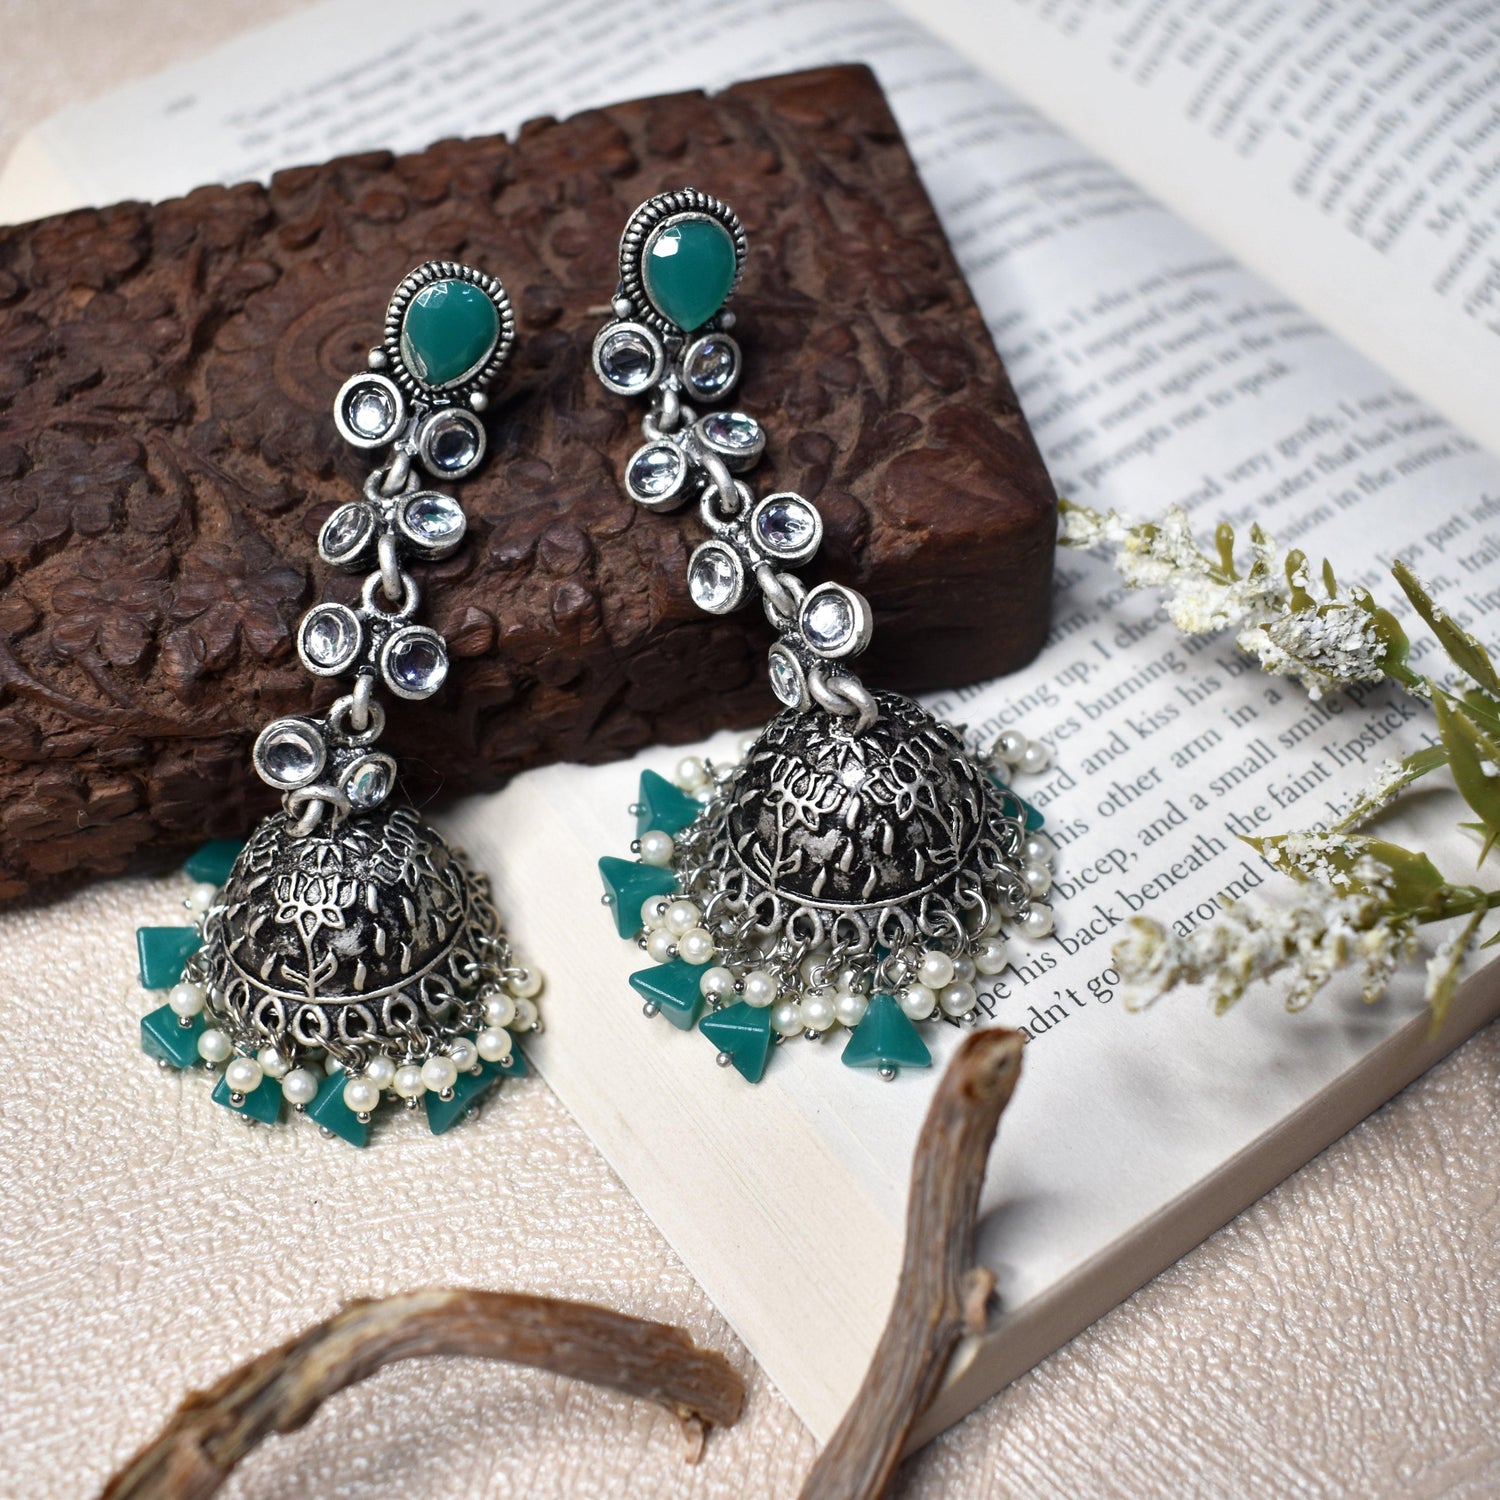 Silver Oxidized Earrings with Green Stones